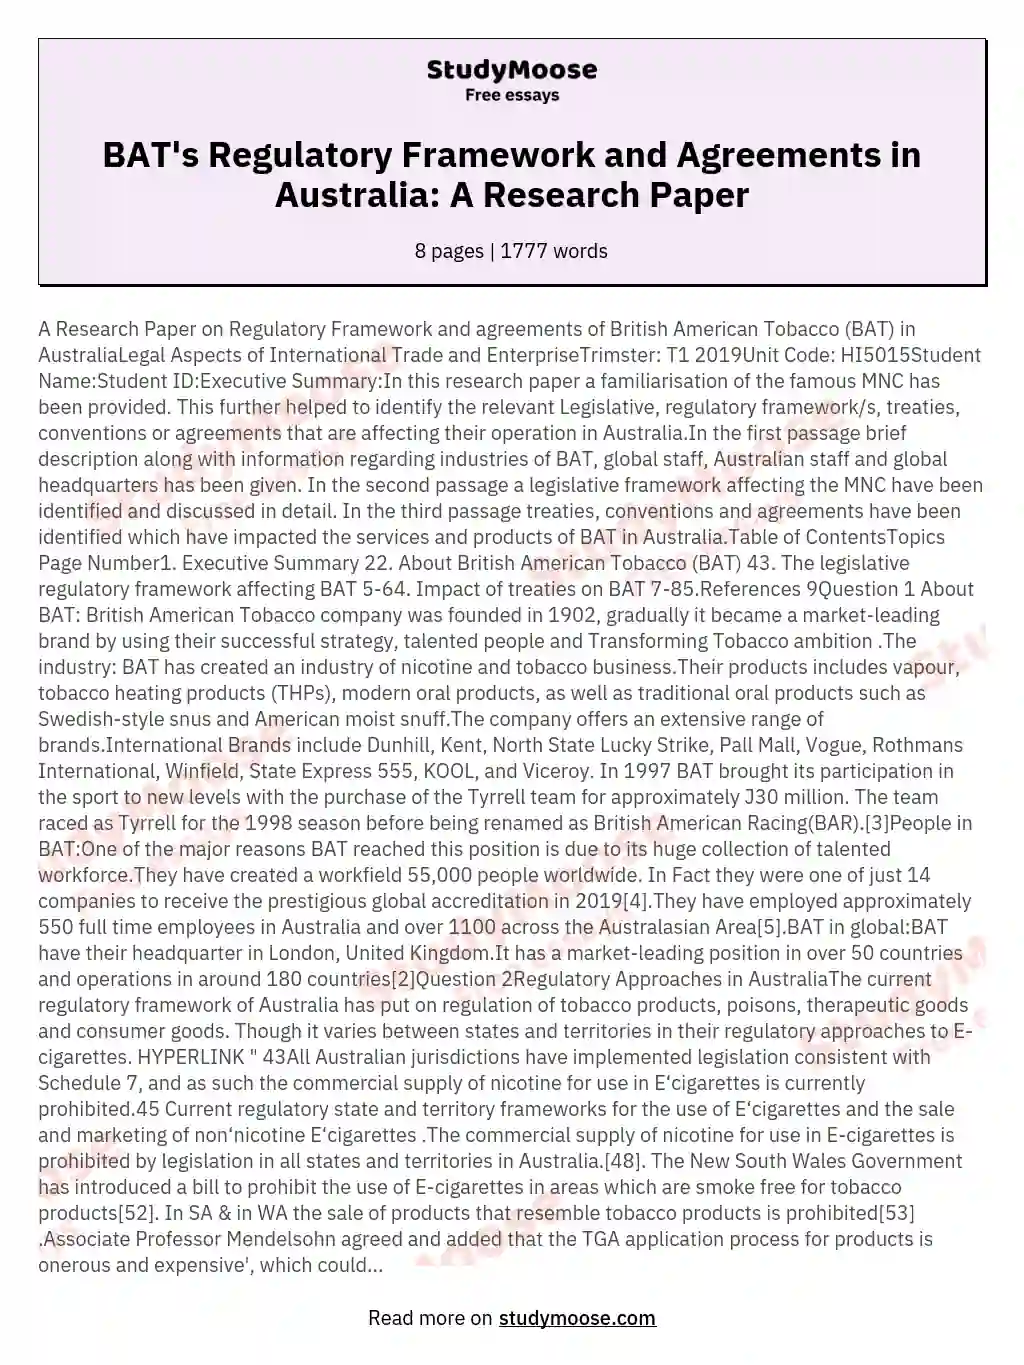 A Research Paper on Regulatory Framework and agreements of British American Tobacco (BAT) in Australia